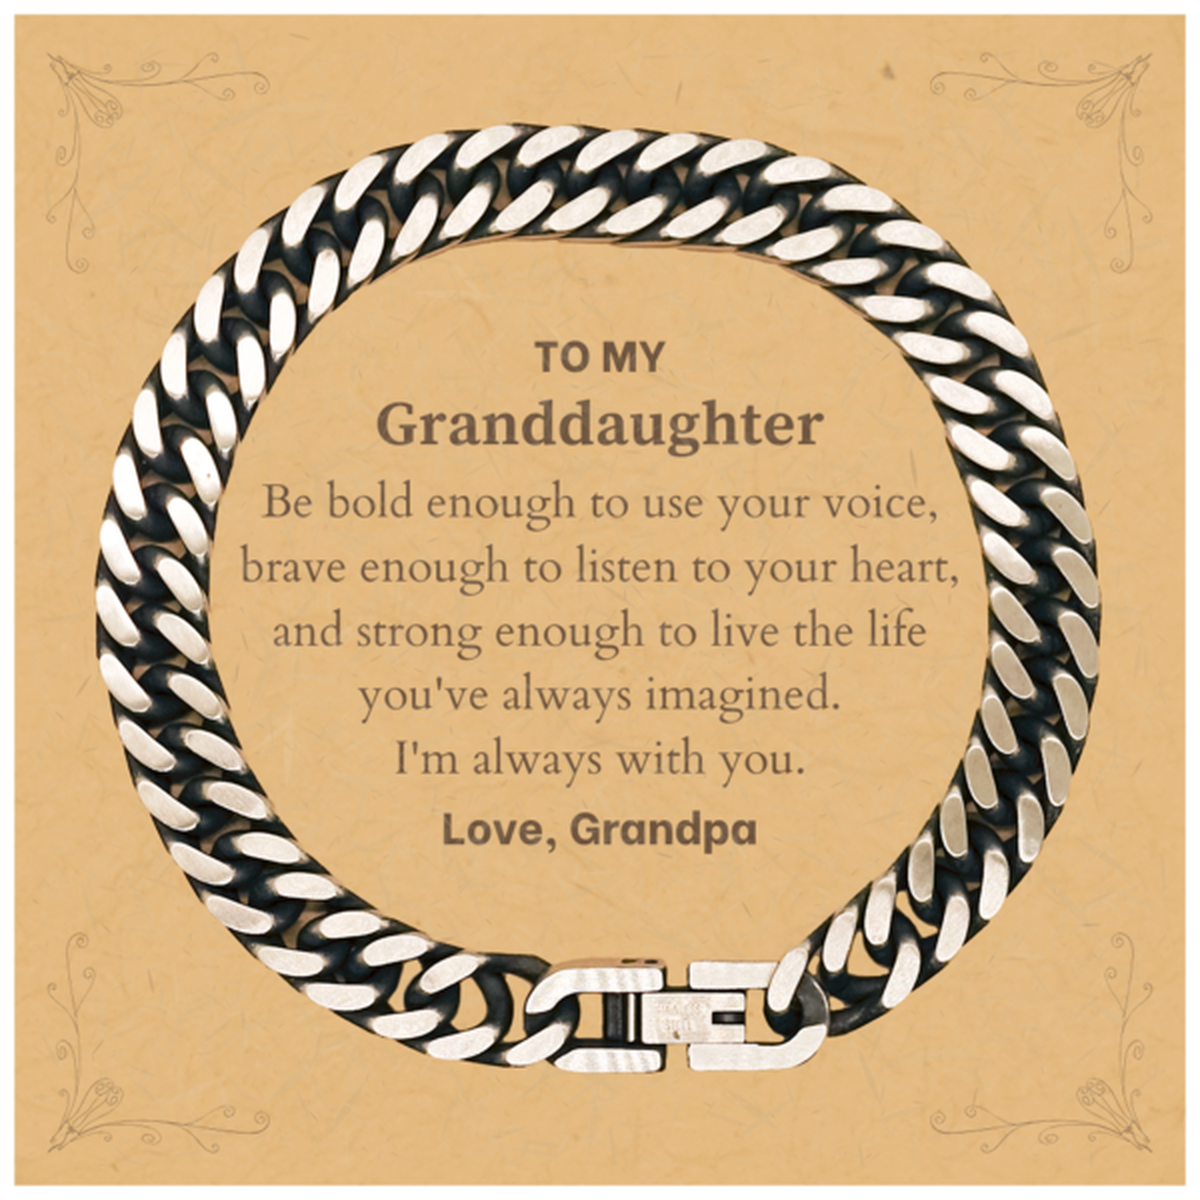 Keepsake Granddaughter Cuban Link Chain Bracelet Gift Idea Graduation Christmas Birthday Granddaughter from Grandpa, Granddaughter Be bold enough to use your voice, brave enough to listen to your heart. Love, Grandpa